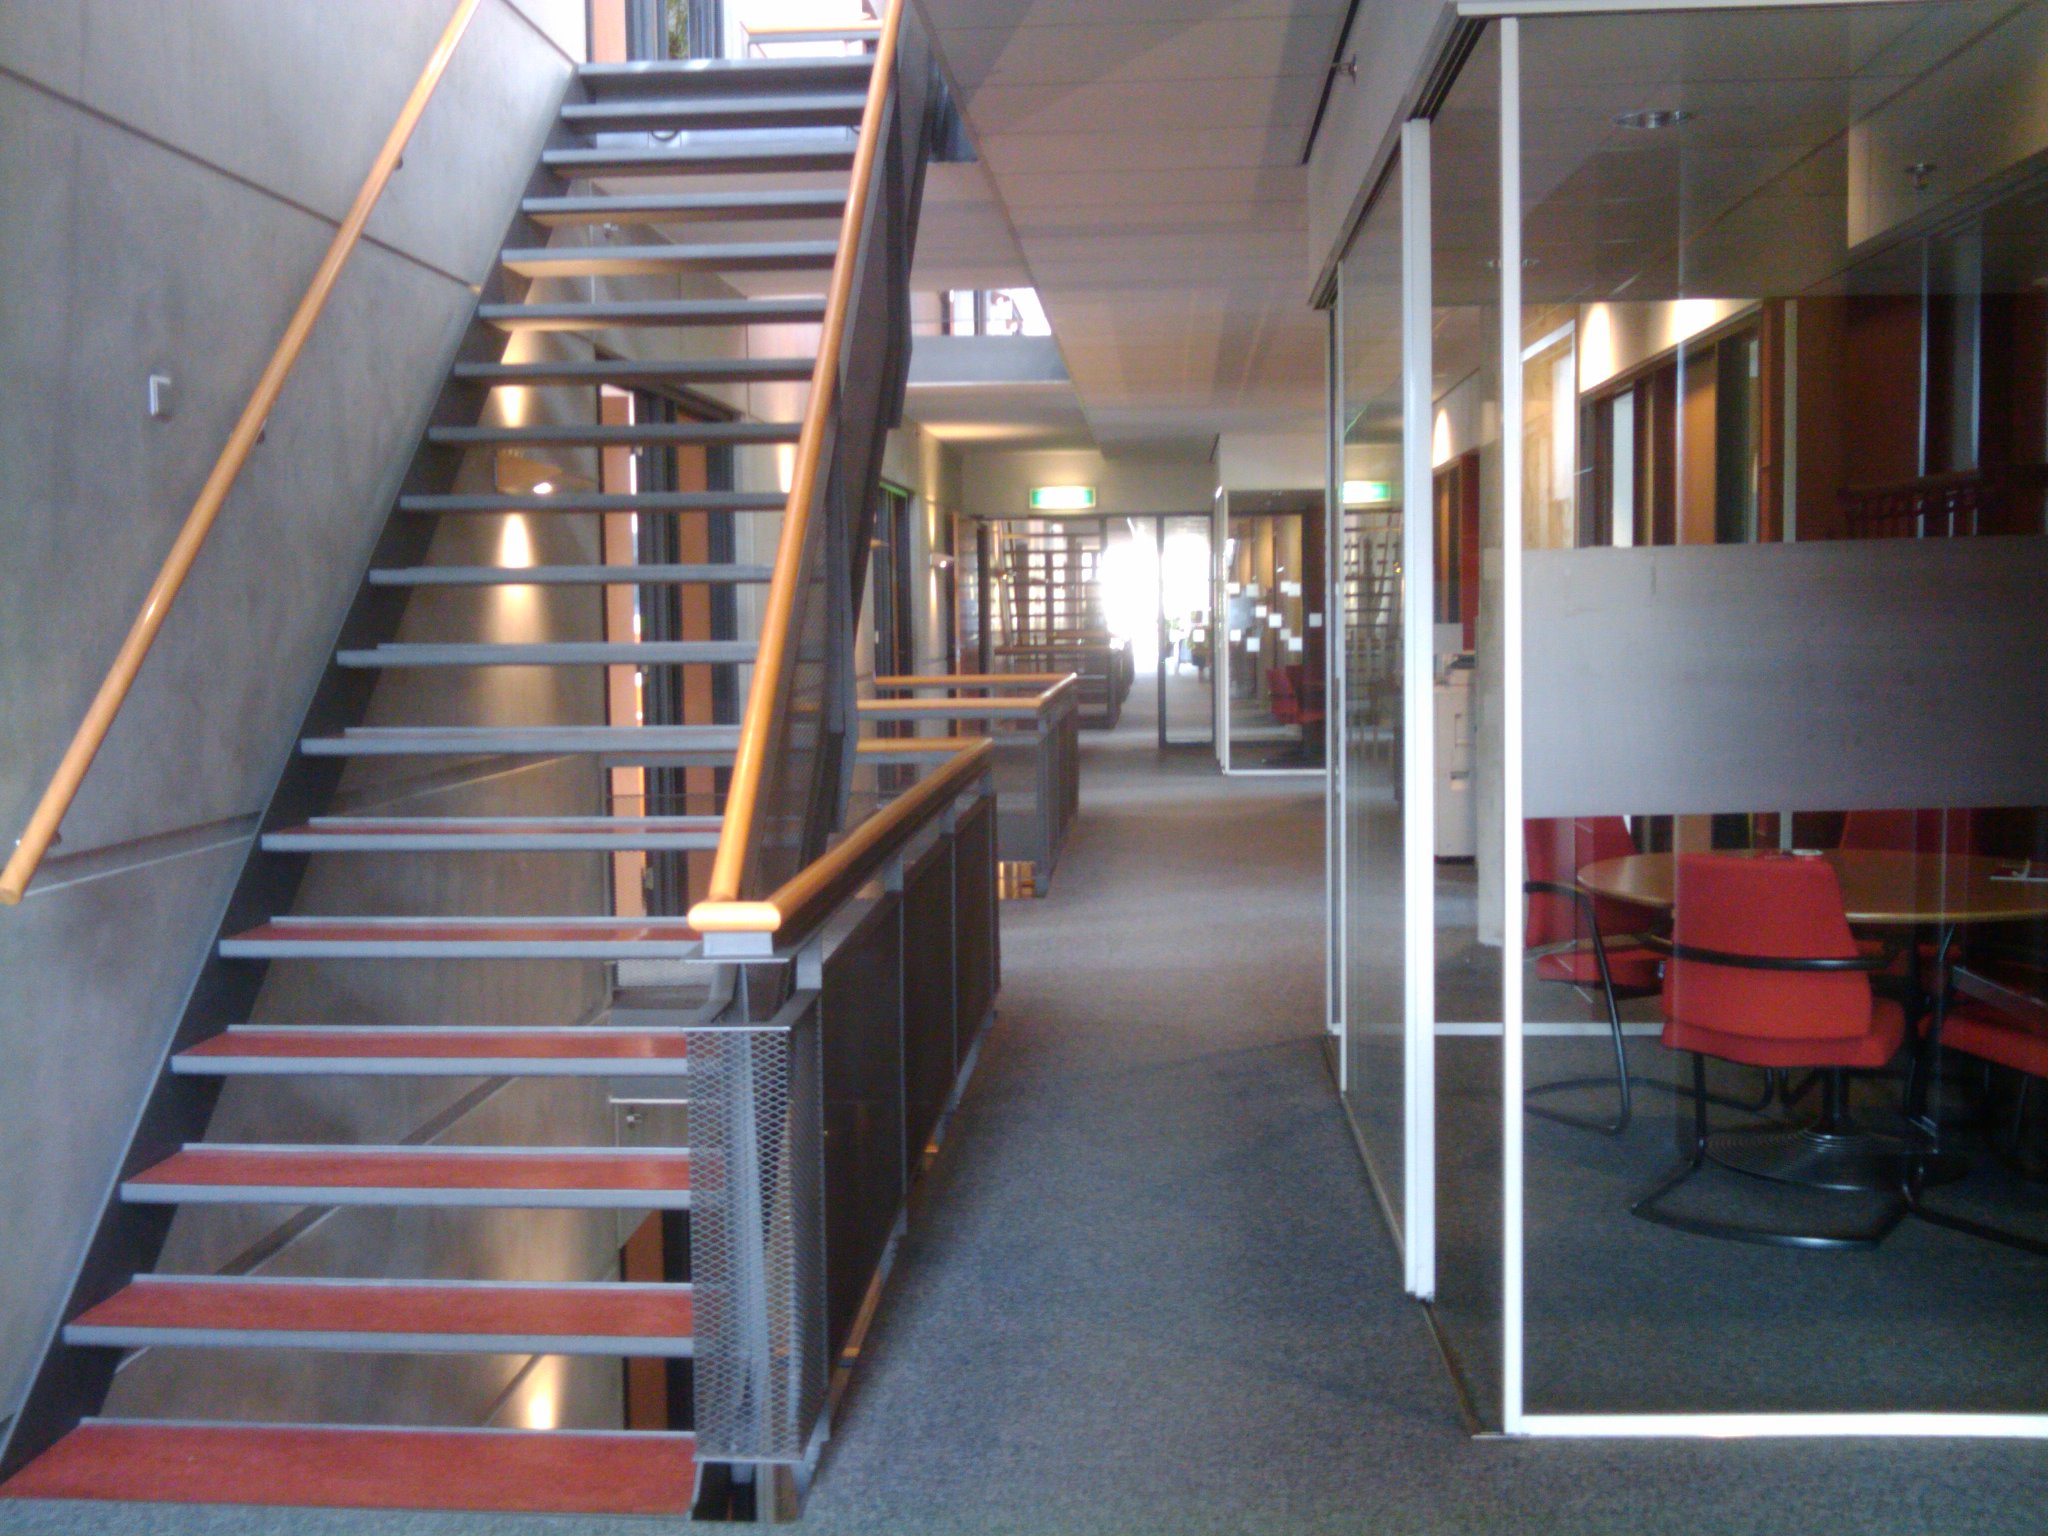 the stairs to the first floor are lined with red chairs